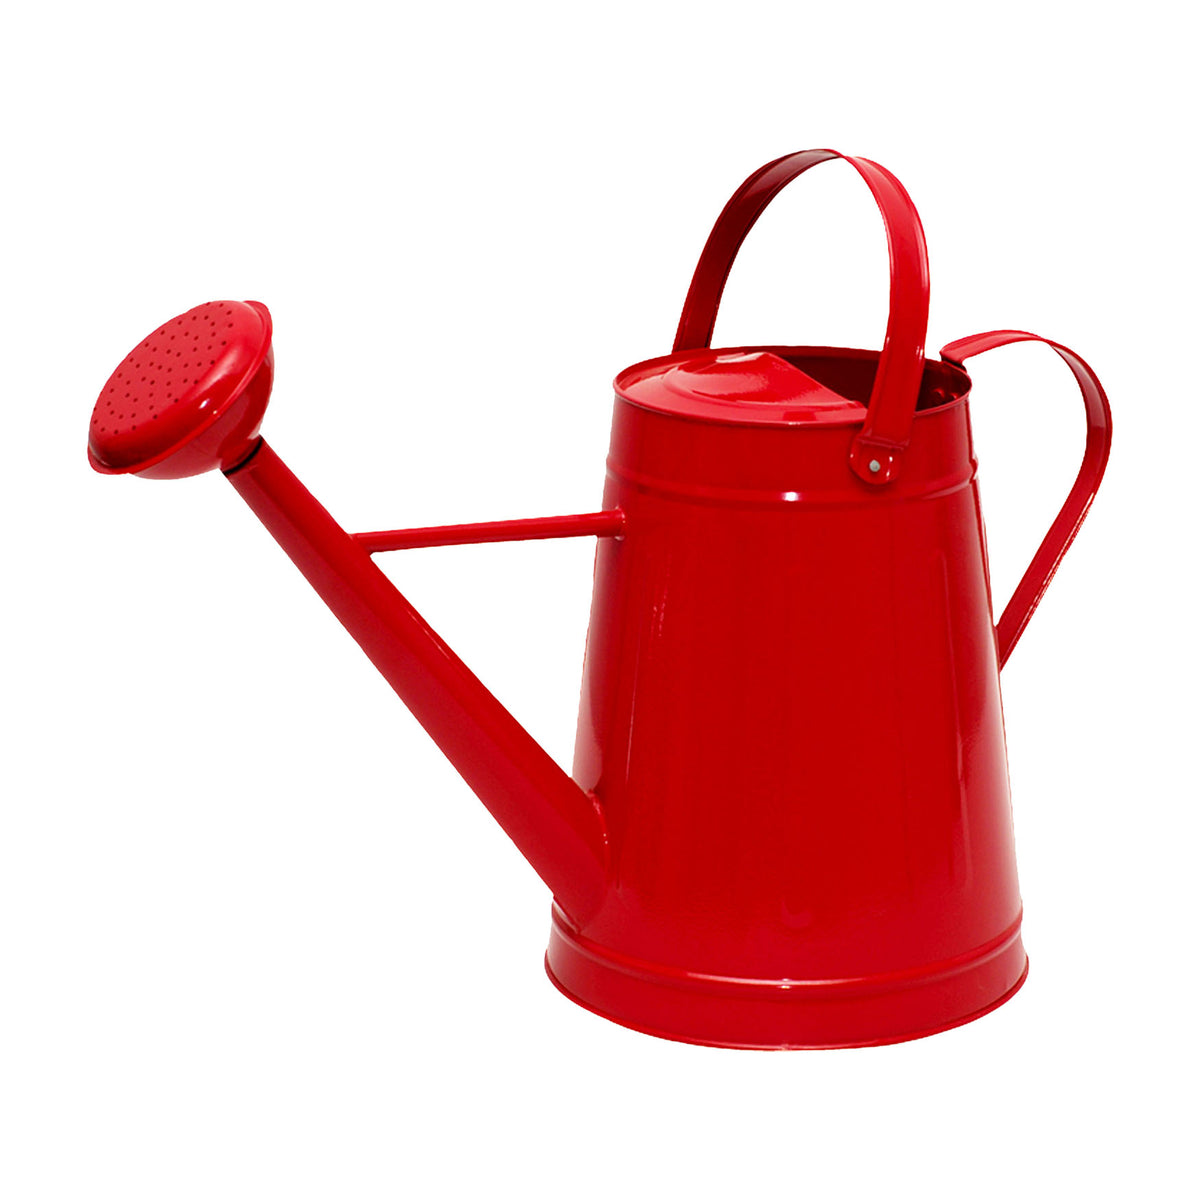 2.1 Gal Red Metal Watering Can. Made of steel. 3.5&quot;x 6&quot; 20&quot;L x 9&quot;W x 15.5&quot;H, 2lbs.